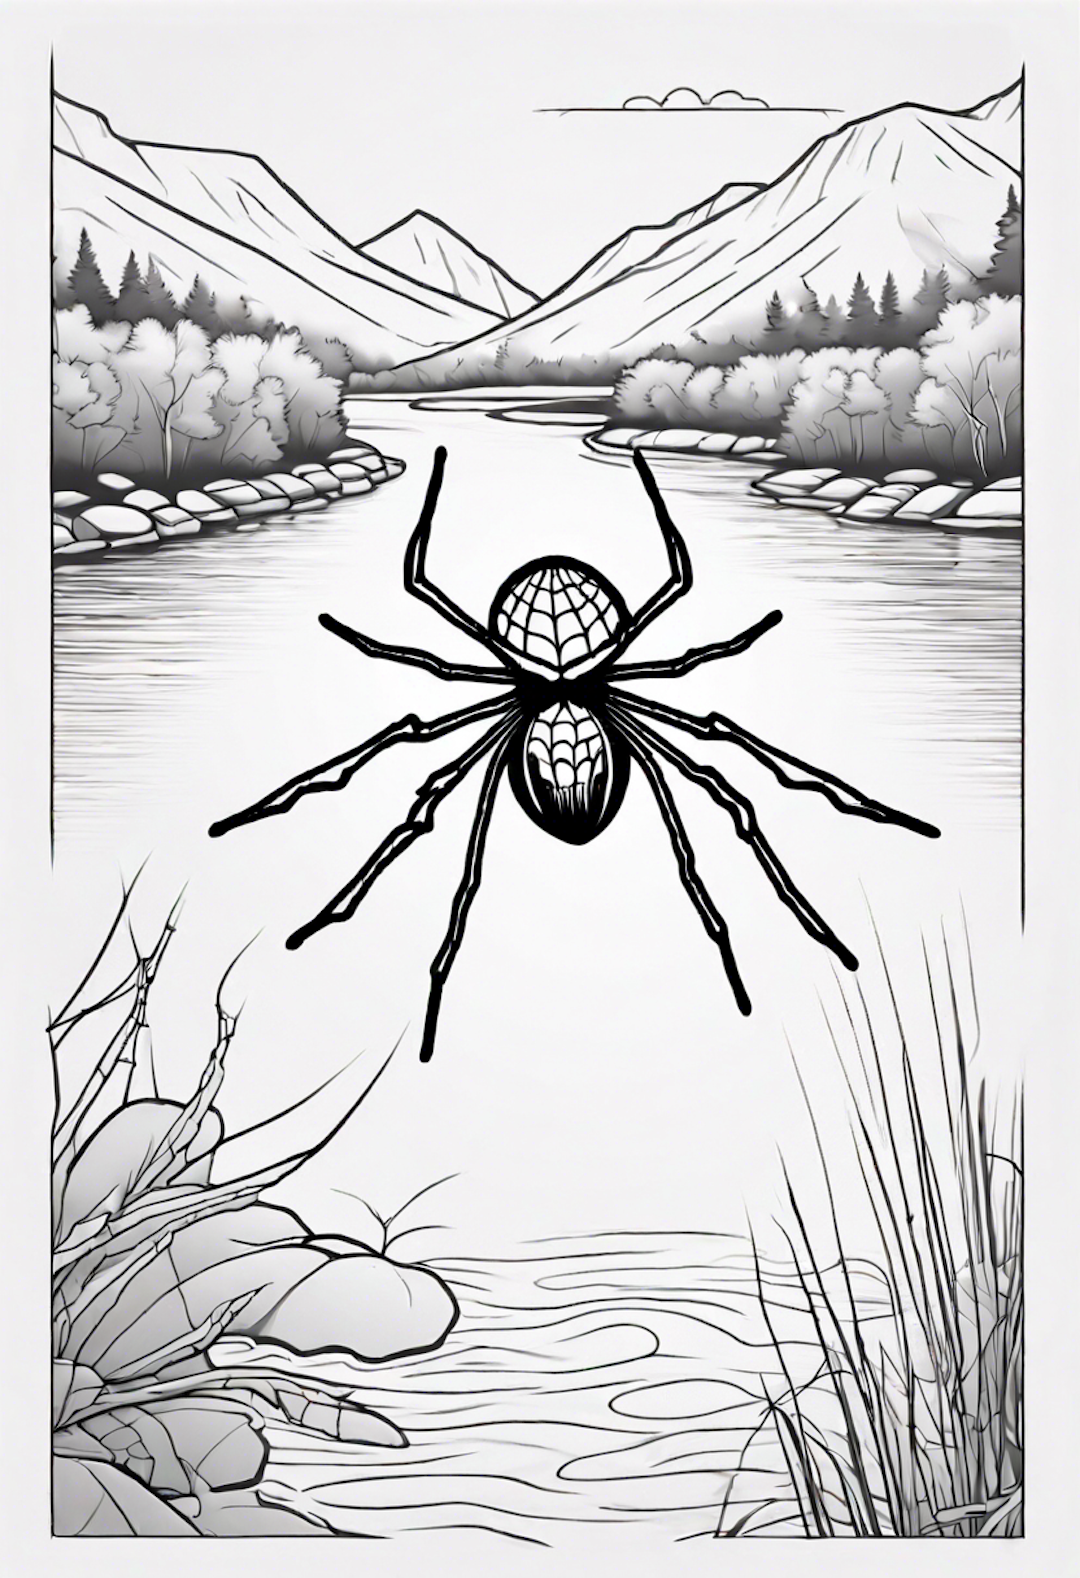 A Spider On A Web At A River